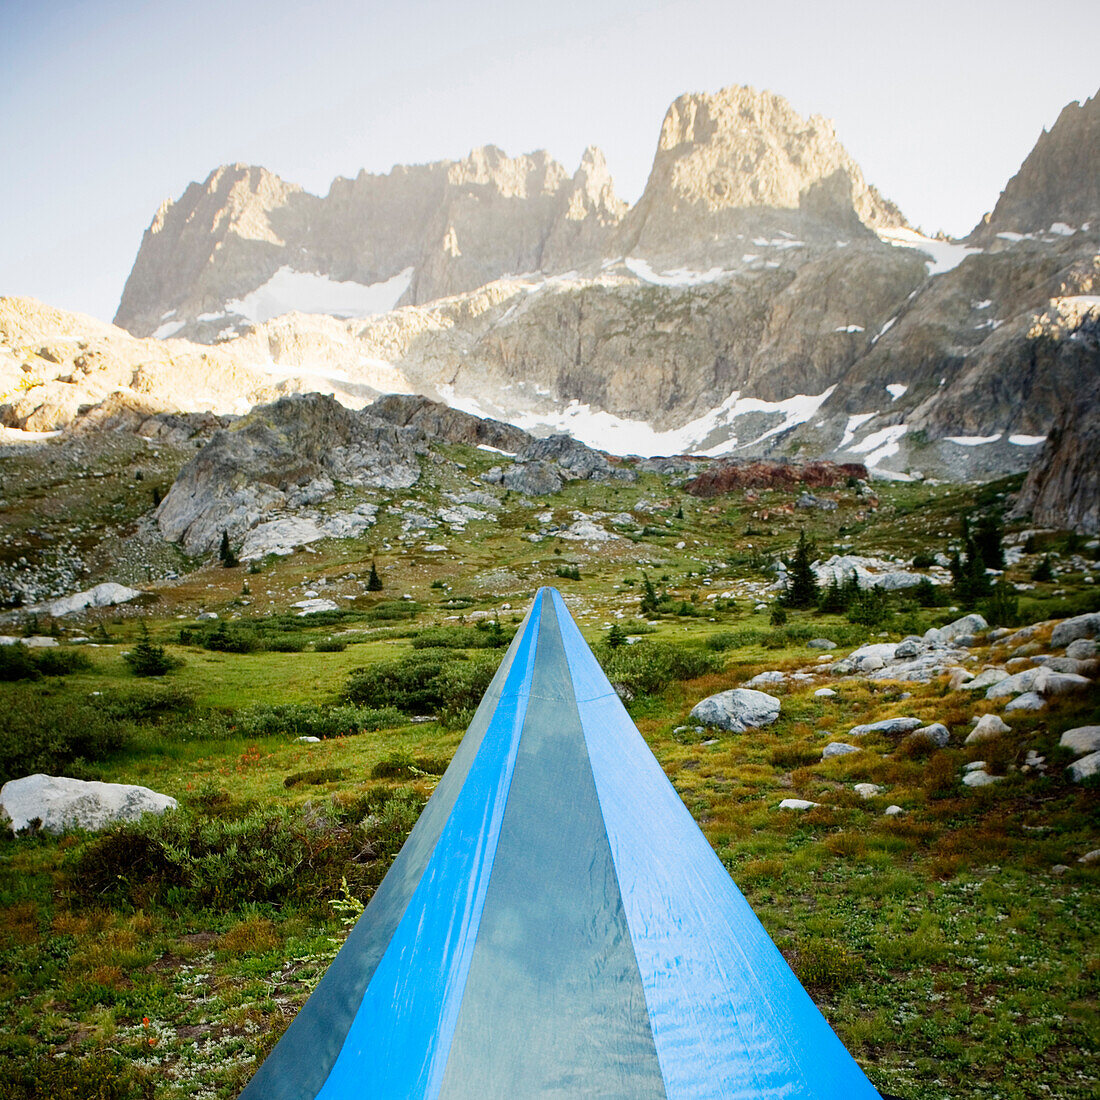 The top of a blue tent, pitched in a outdoor environment, Ansel Adams Wilderness Area, Sierra Nevada, CA. USA.